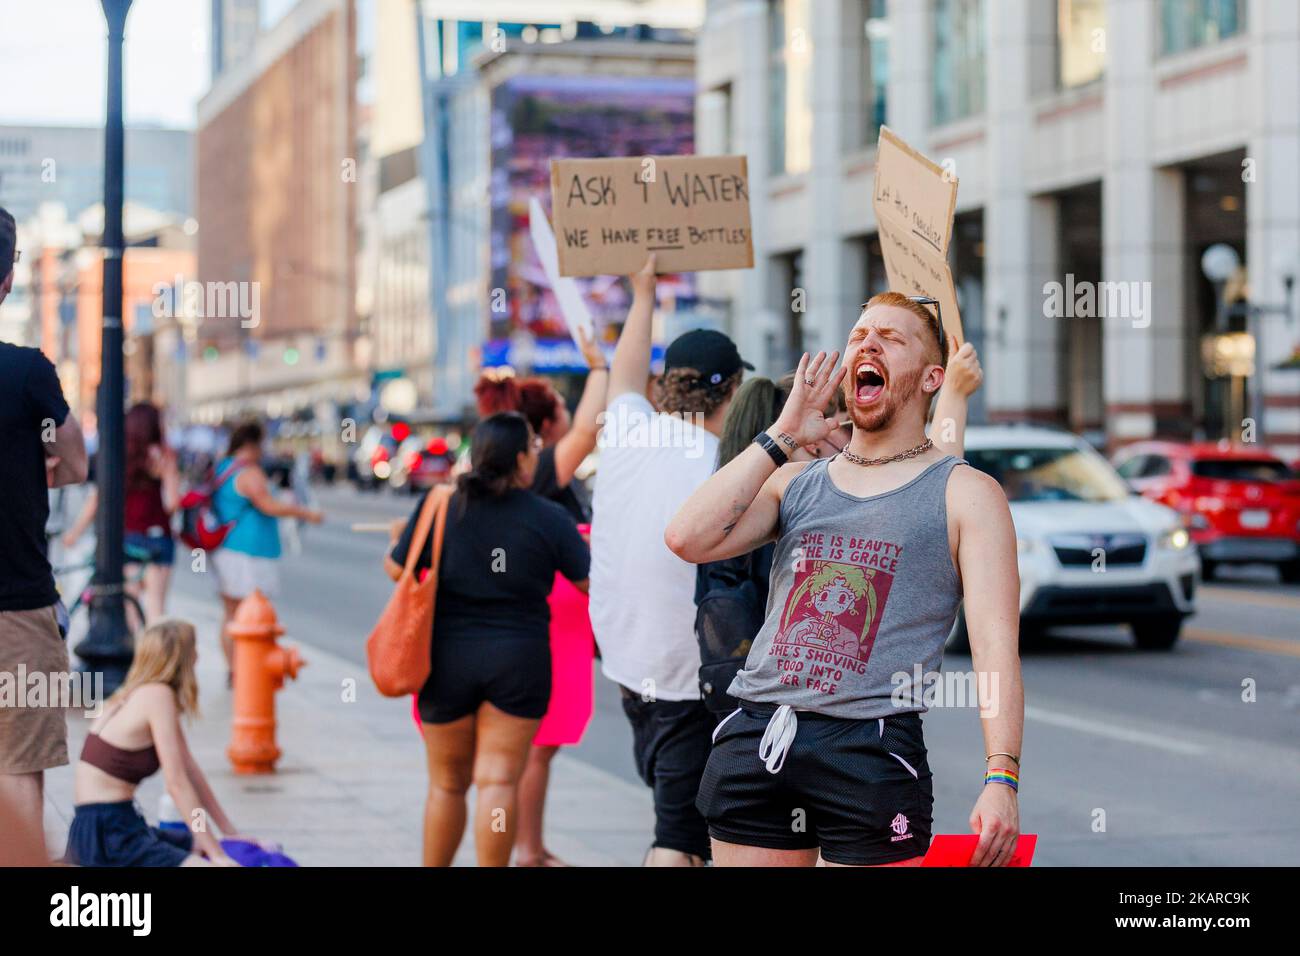 A man yelling loudly at a protest along city street Stock Photo